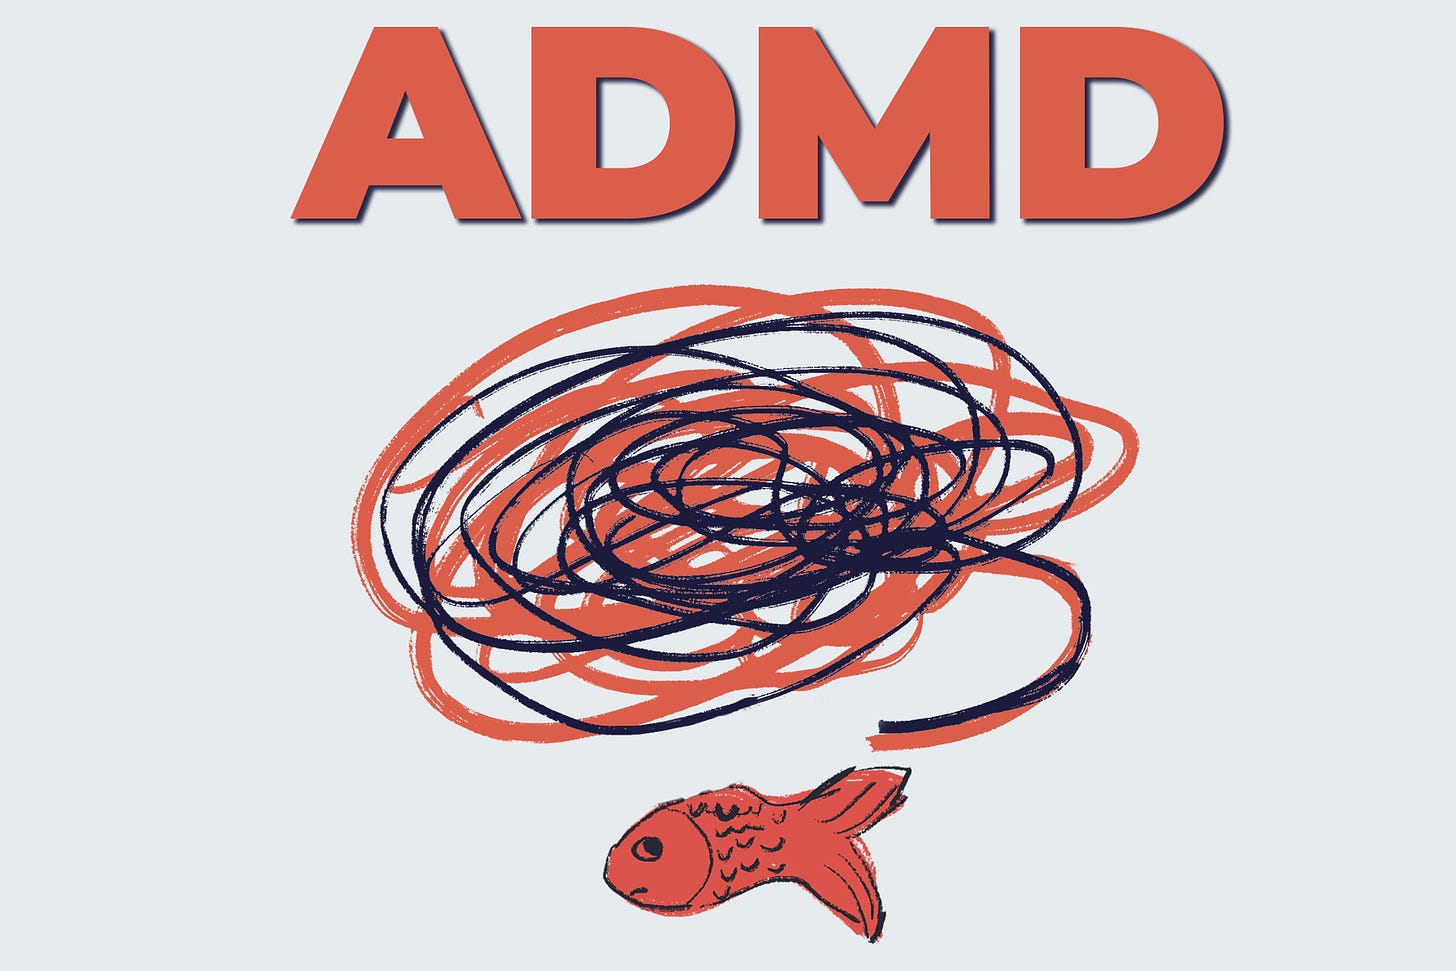 ADMD logo - a red fish with a red and blue brain-shaped squiggle above it. At the top, large letters that spell "ADMD"